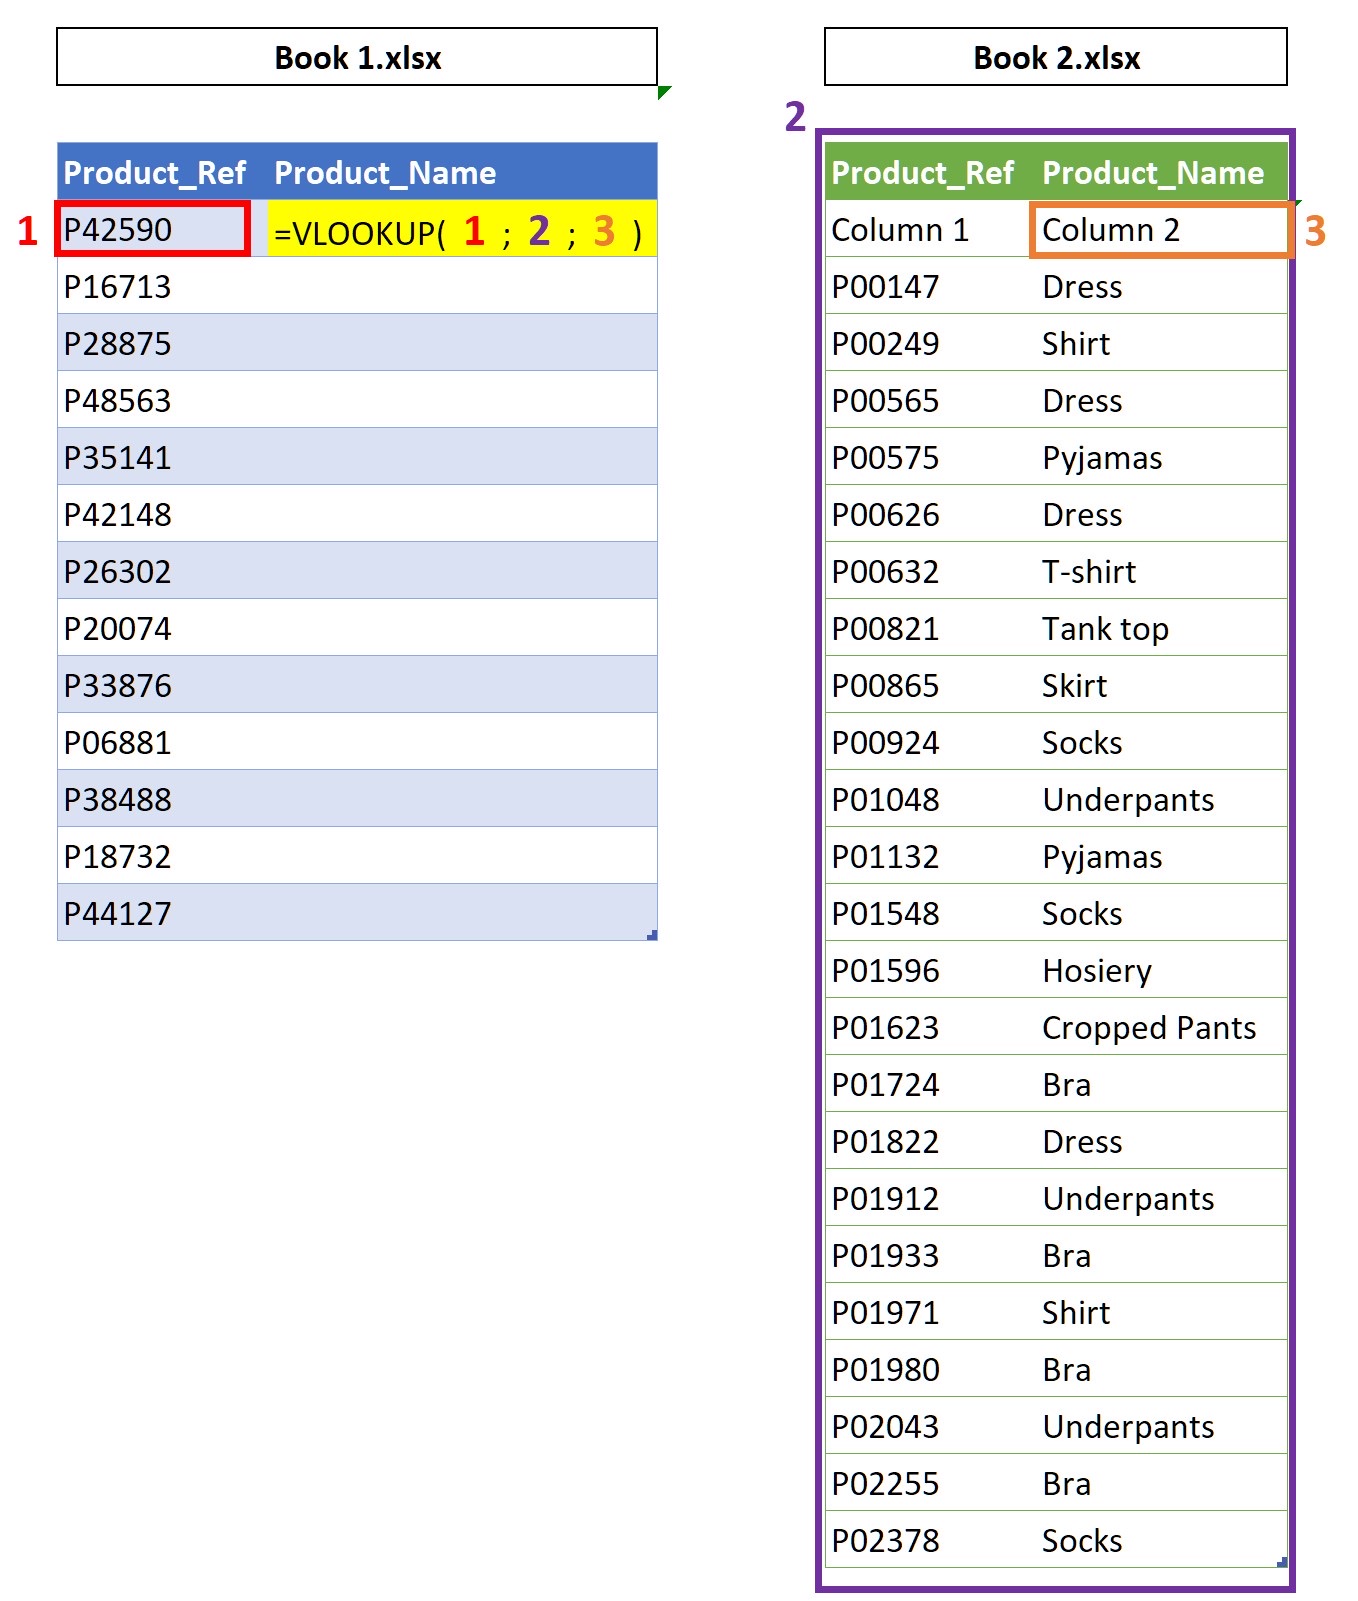 Understand how the VLOOKUP() function works